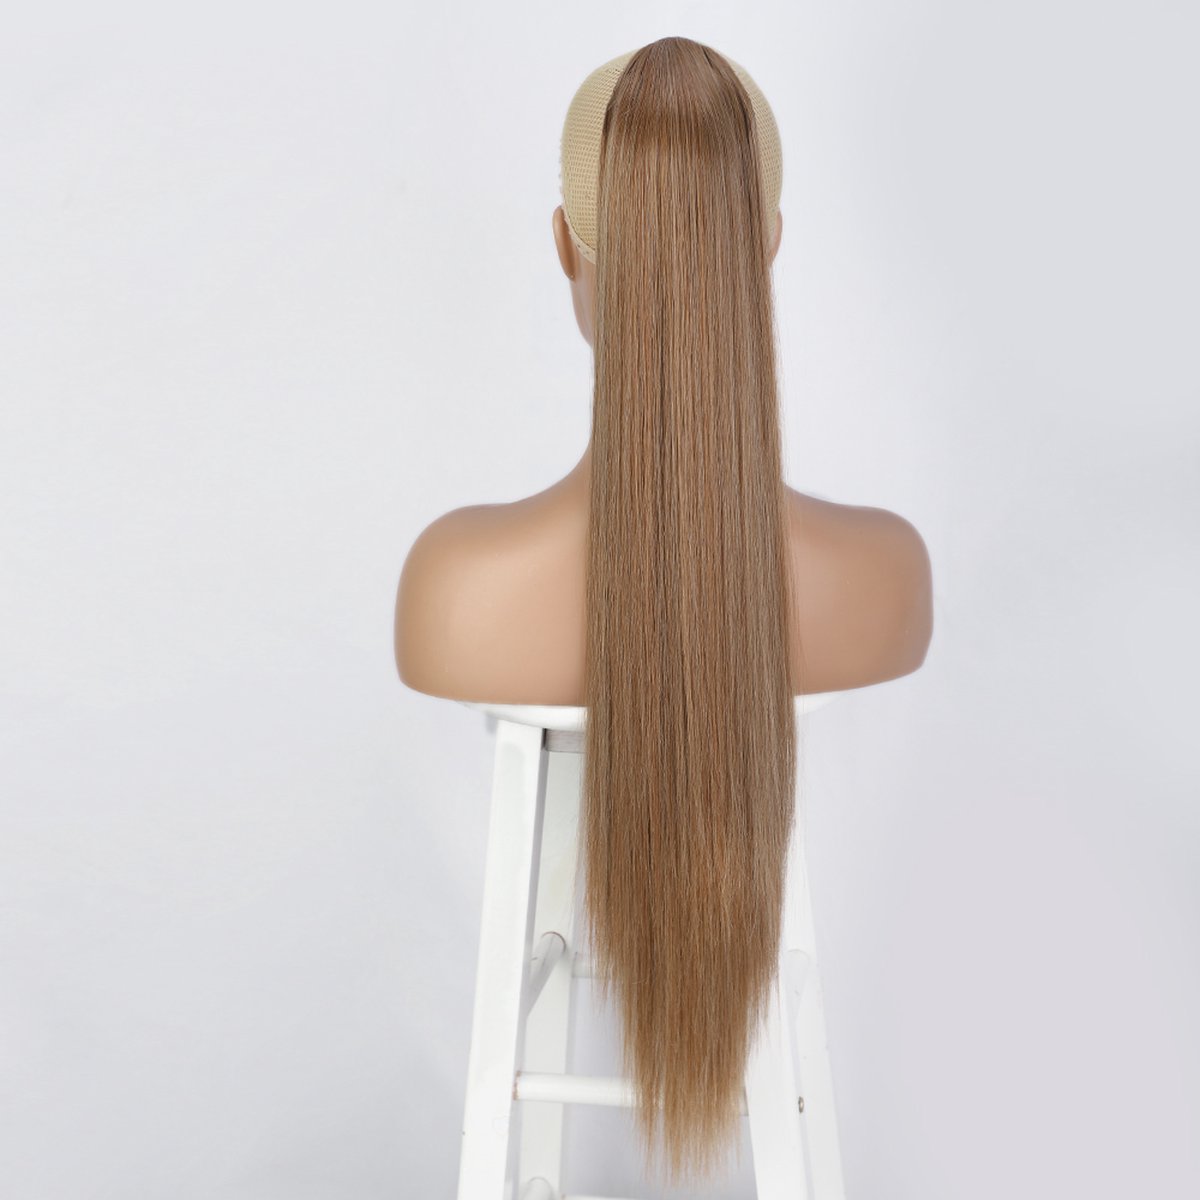 Miss Ponytails - Straight ponytail extentions - 26 inch - Blond 12/613 - Hair extentions - Haarverlenging